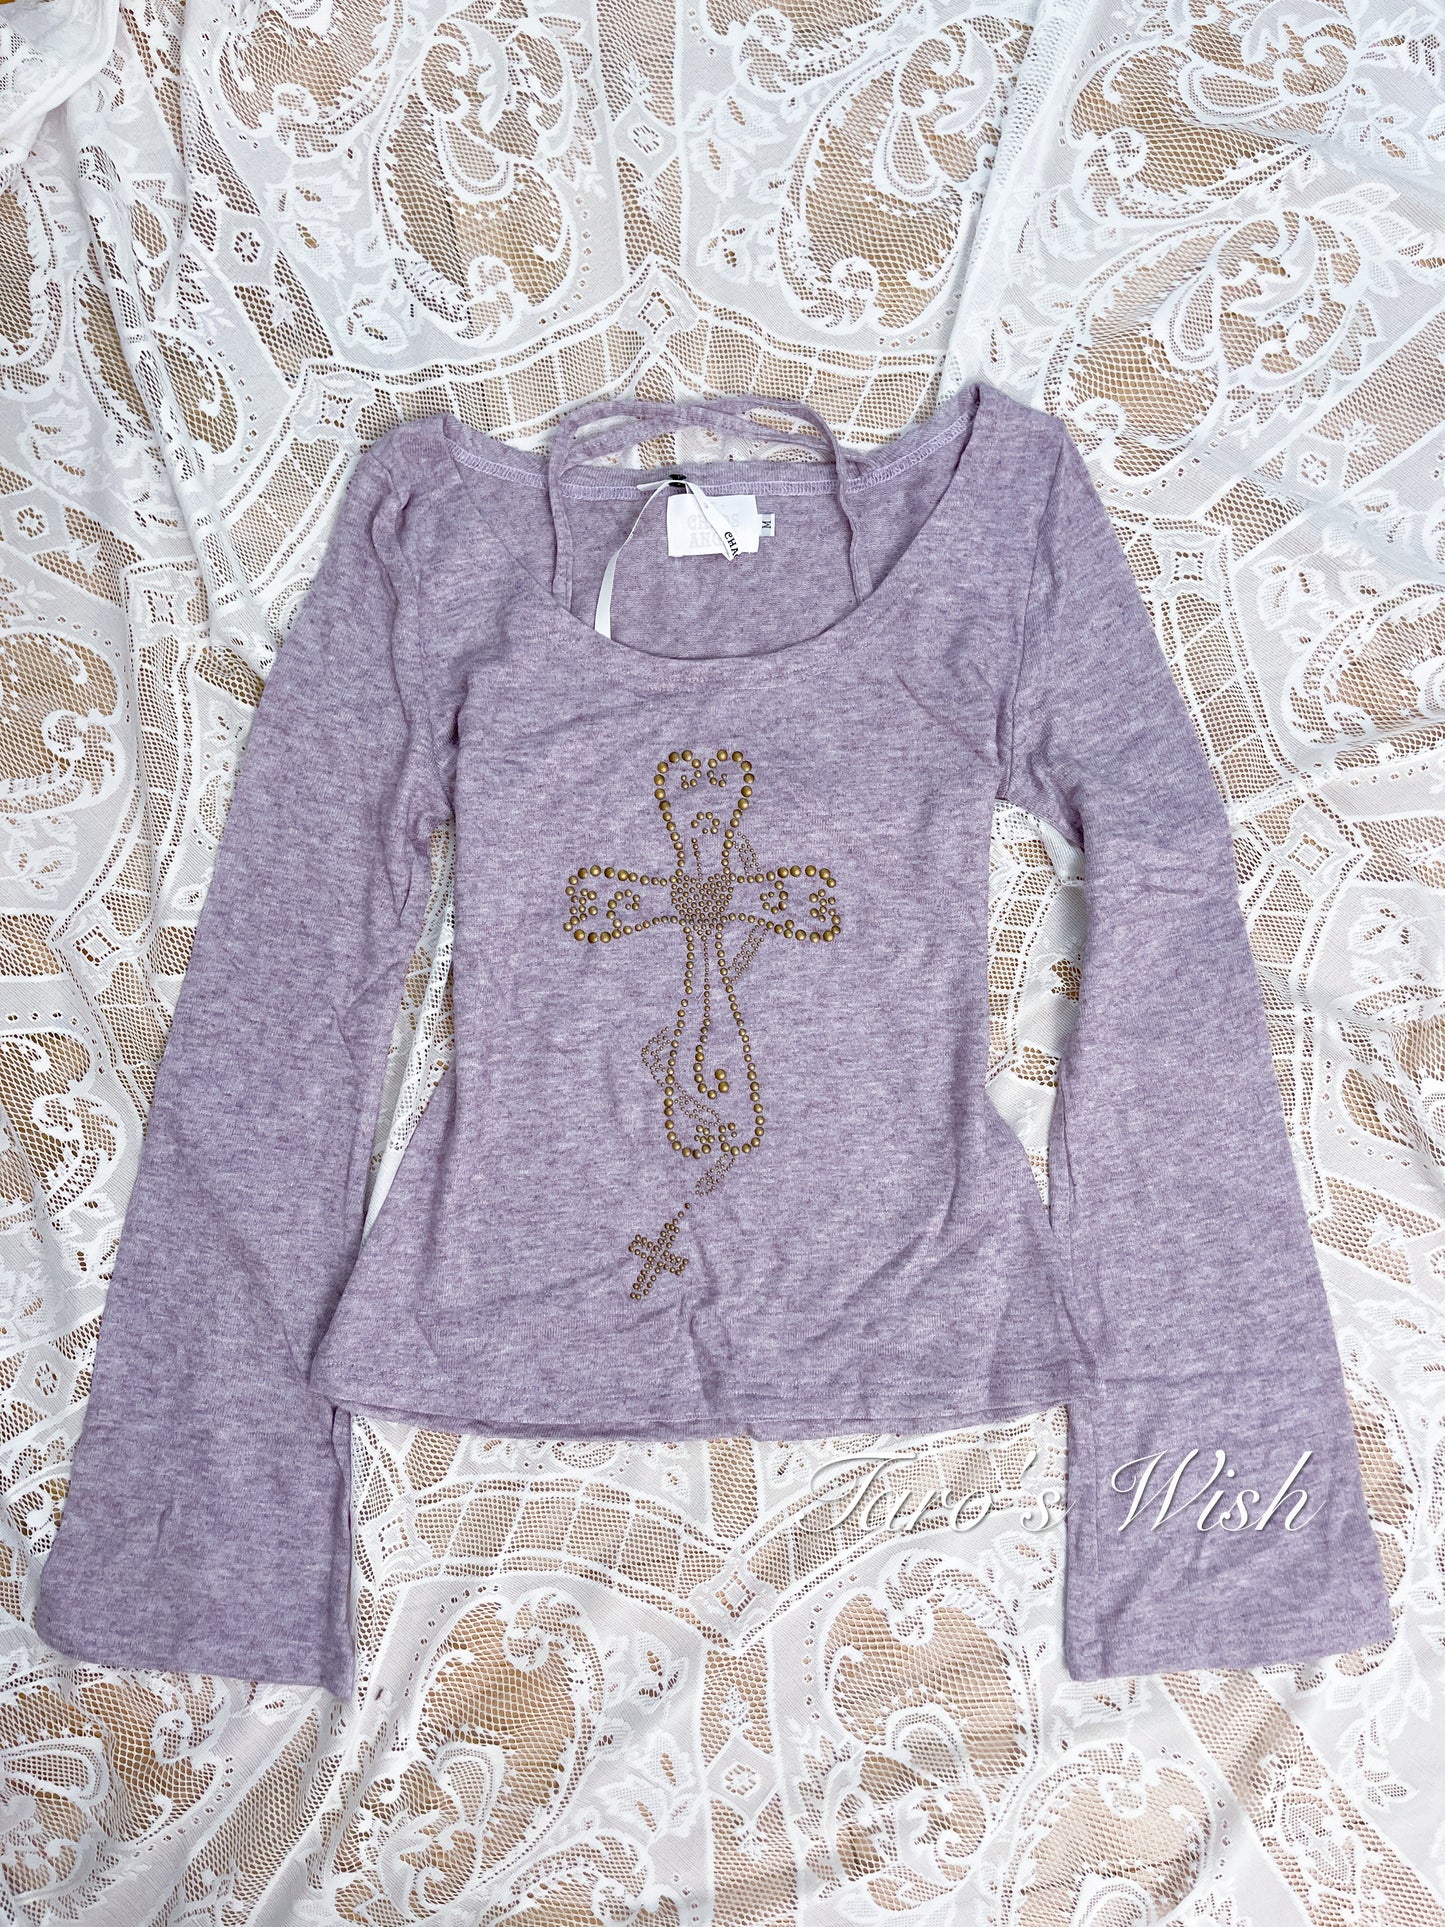 CHAOS ANGEL Cross Rivets Patterns Long Sleeves Top in Taro Lilac Color